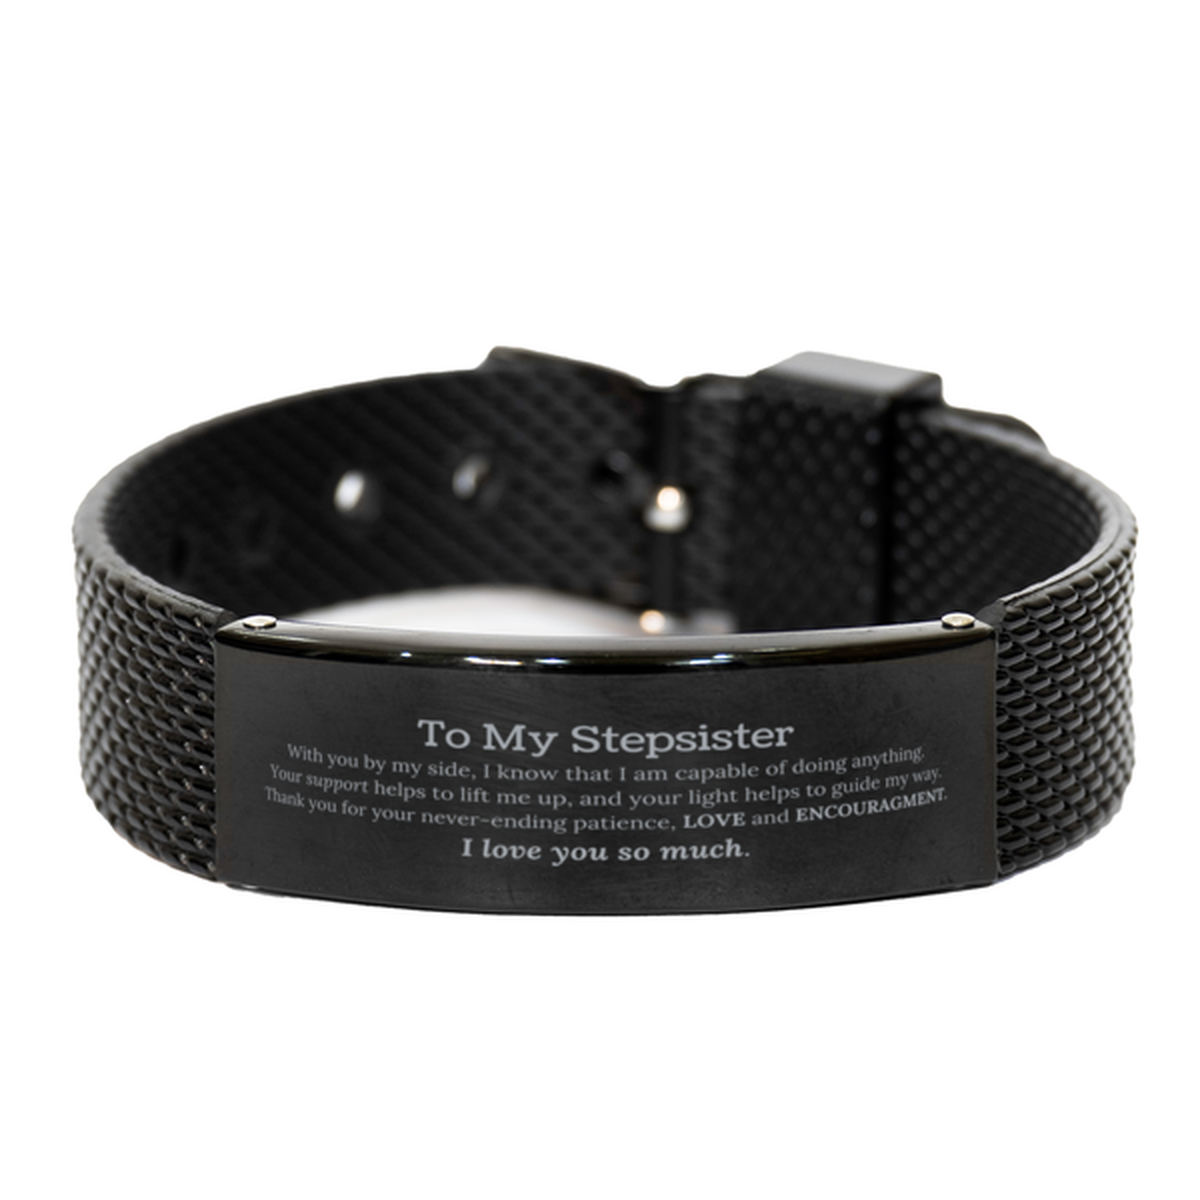 Appreciation Stepsister Black Shark Mesh Bracelet Gifts, To My Stepsister Birthday Christmas Wedding Keepsake Gifts for Stepsister With you by my side, I know that I am capable of doing anything. I love you so much